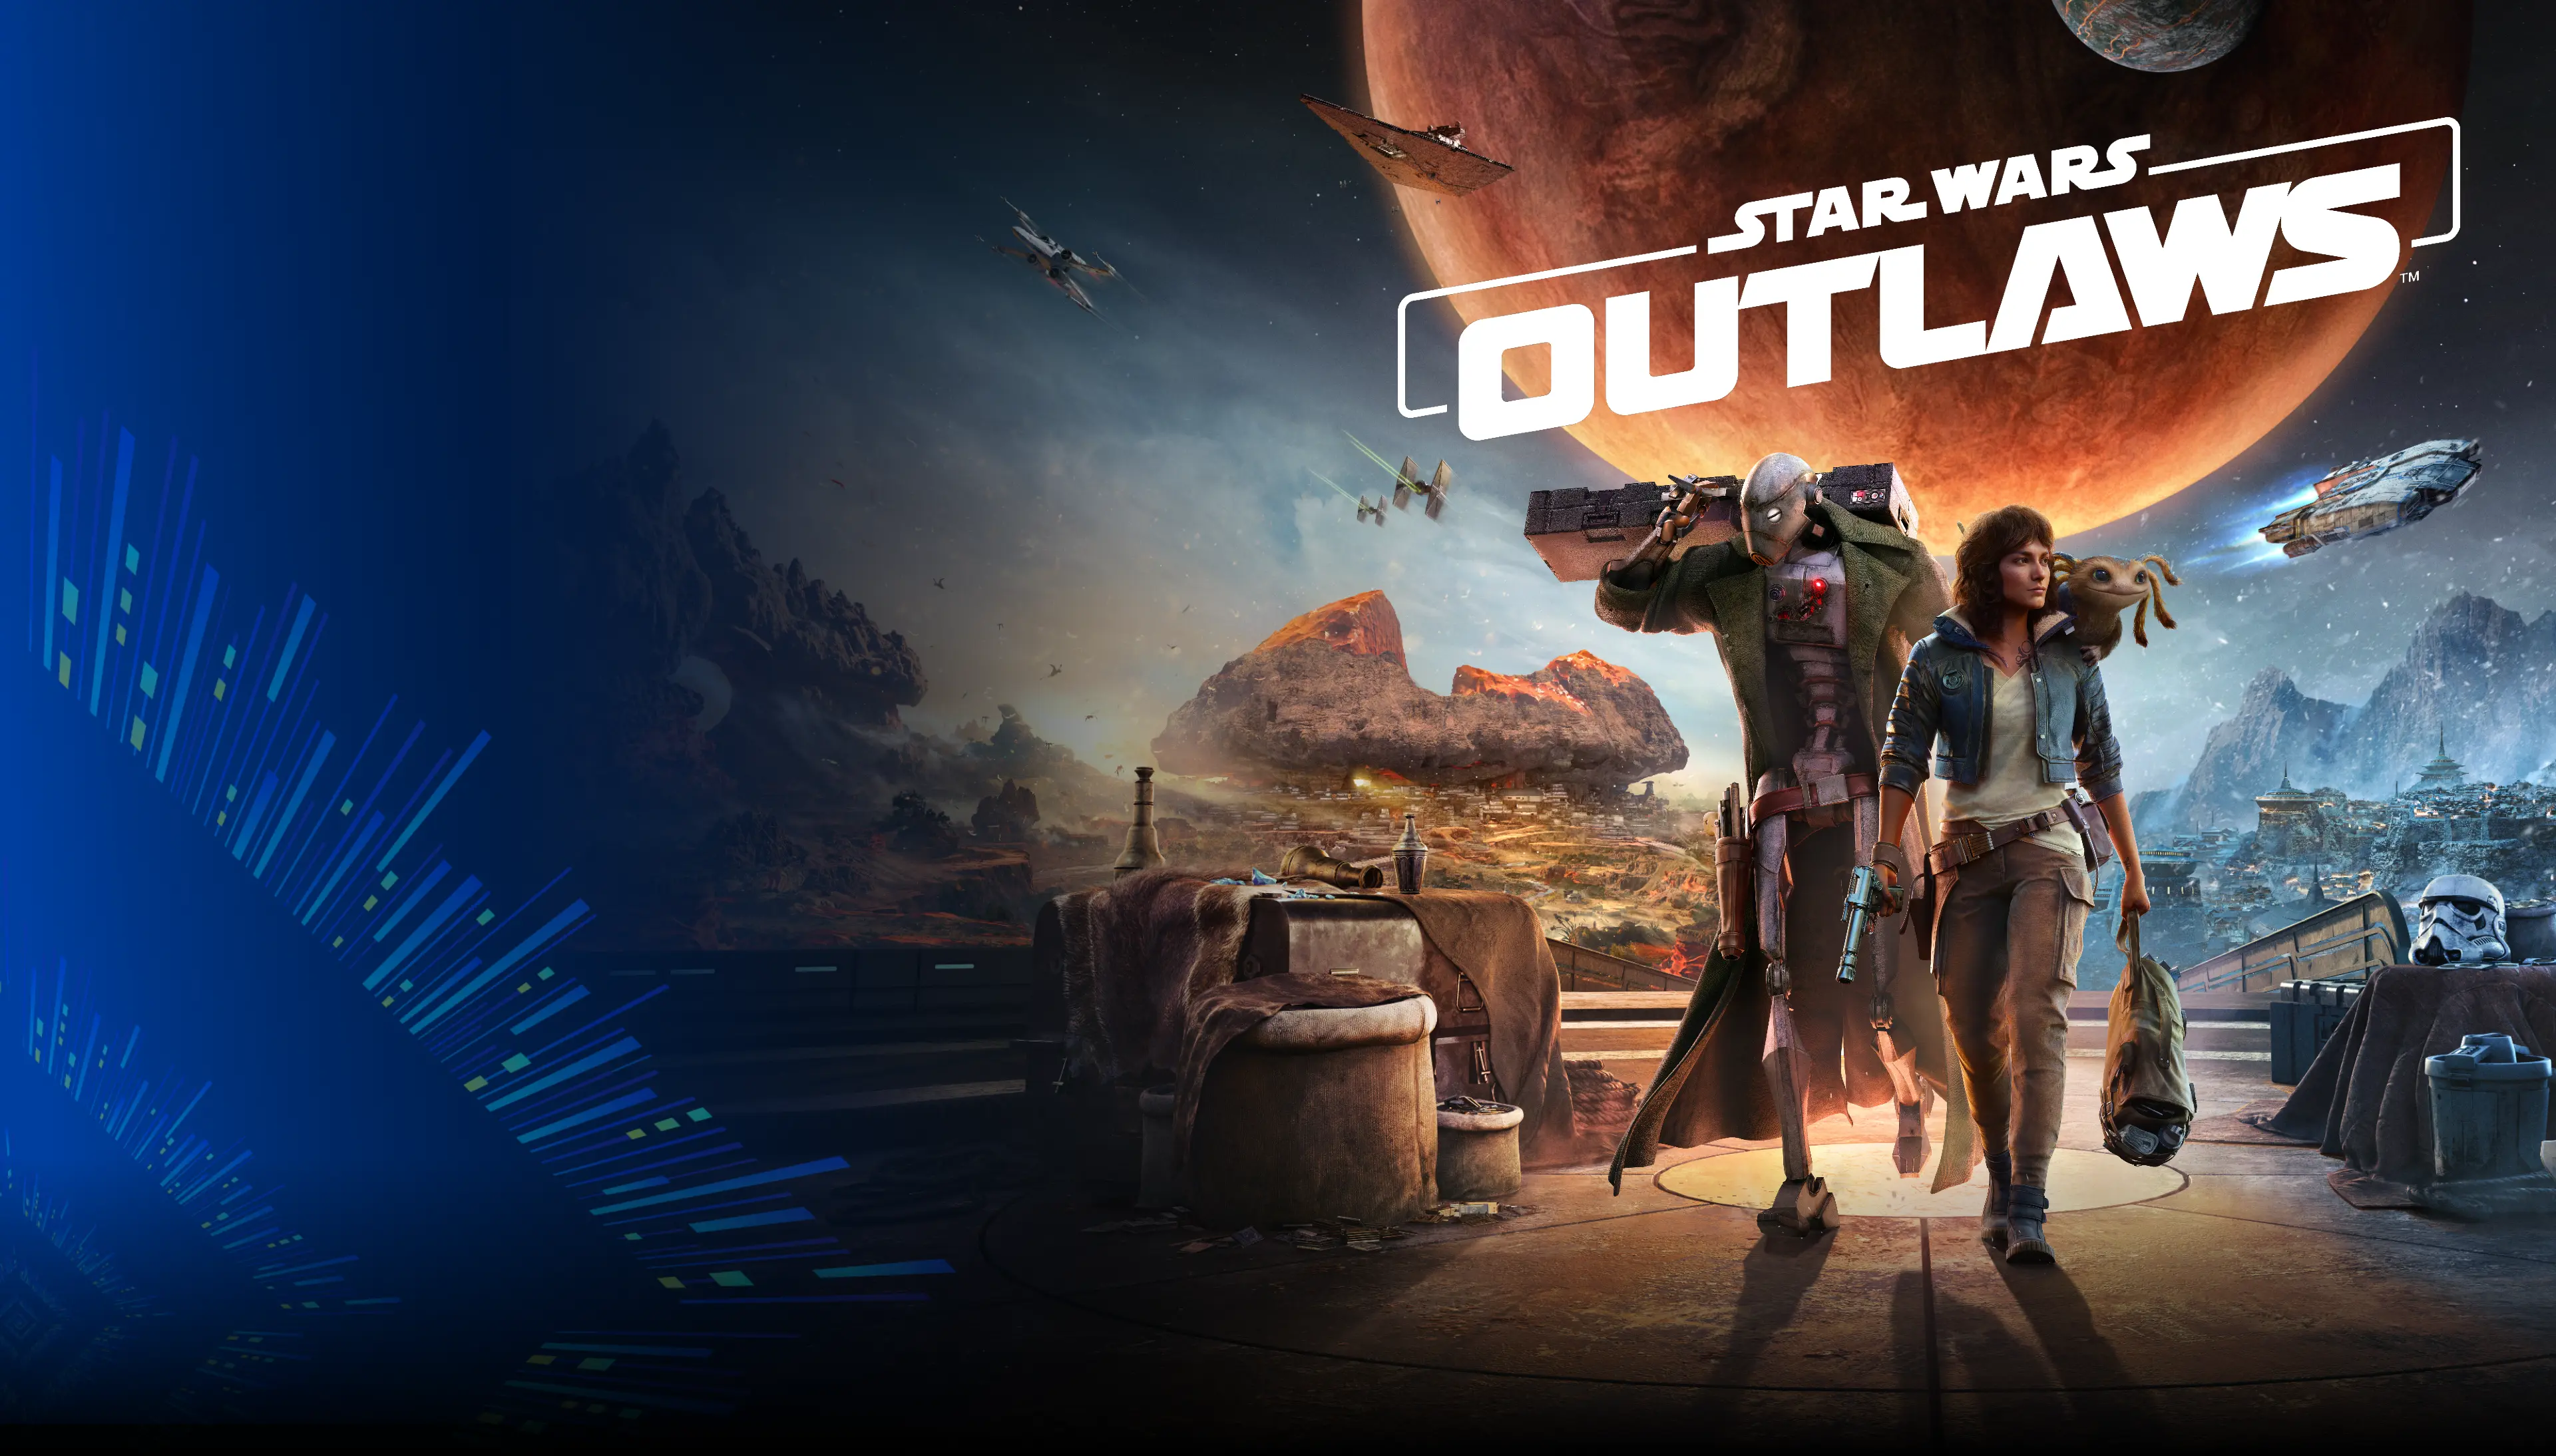 Get Star Wars Outlaws™ with purchase of qualifying Intel® Core 